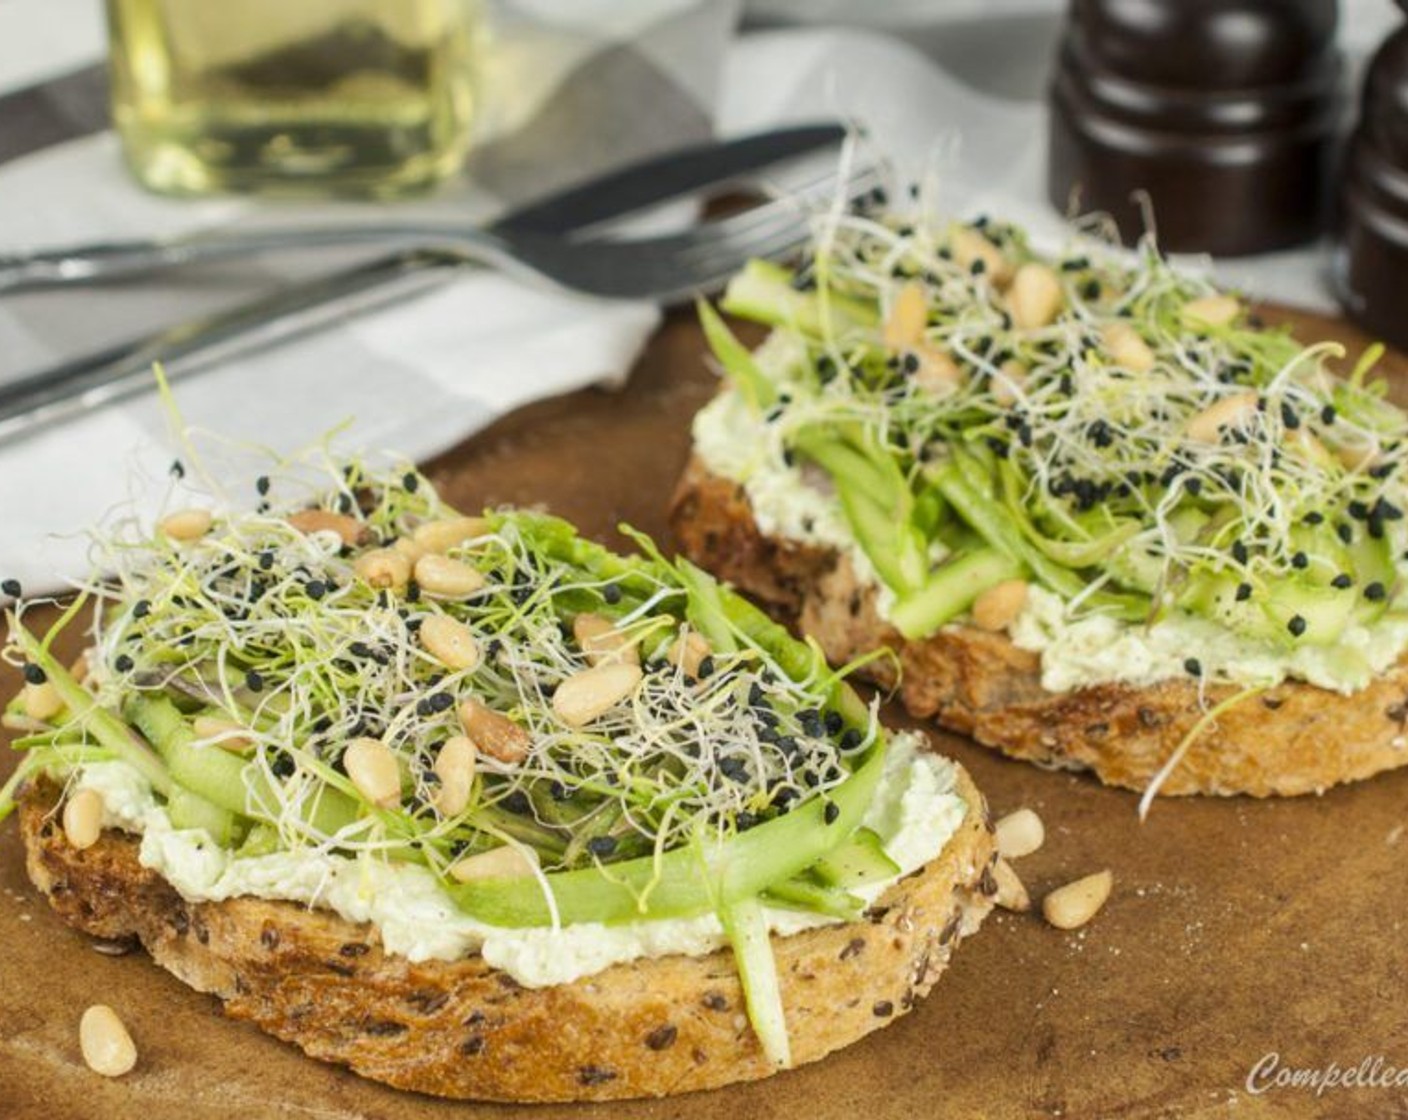 step 8 For each piece of bread, spread with a generous 2 tbsp of cheese spread, top with 1/4 cup of asparagus, top with Alfalfa Sprouts (to taste) and Pine Nuts (1/4 cup). Add Freshly Ground Black Pepper (to taste) if desired and serve immediately, enjoy!